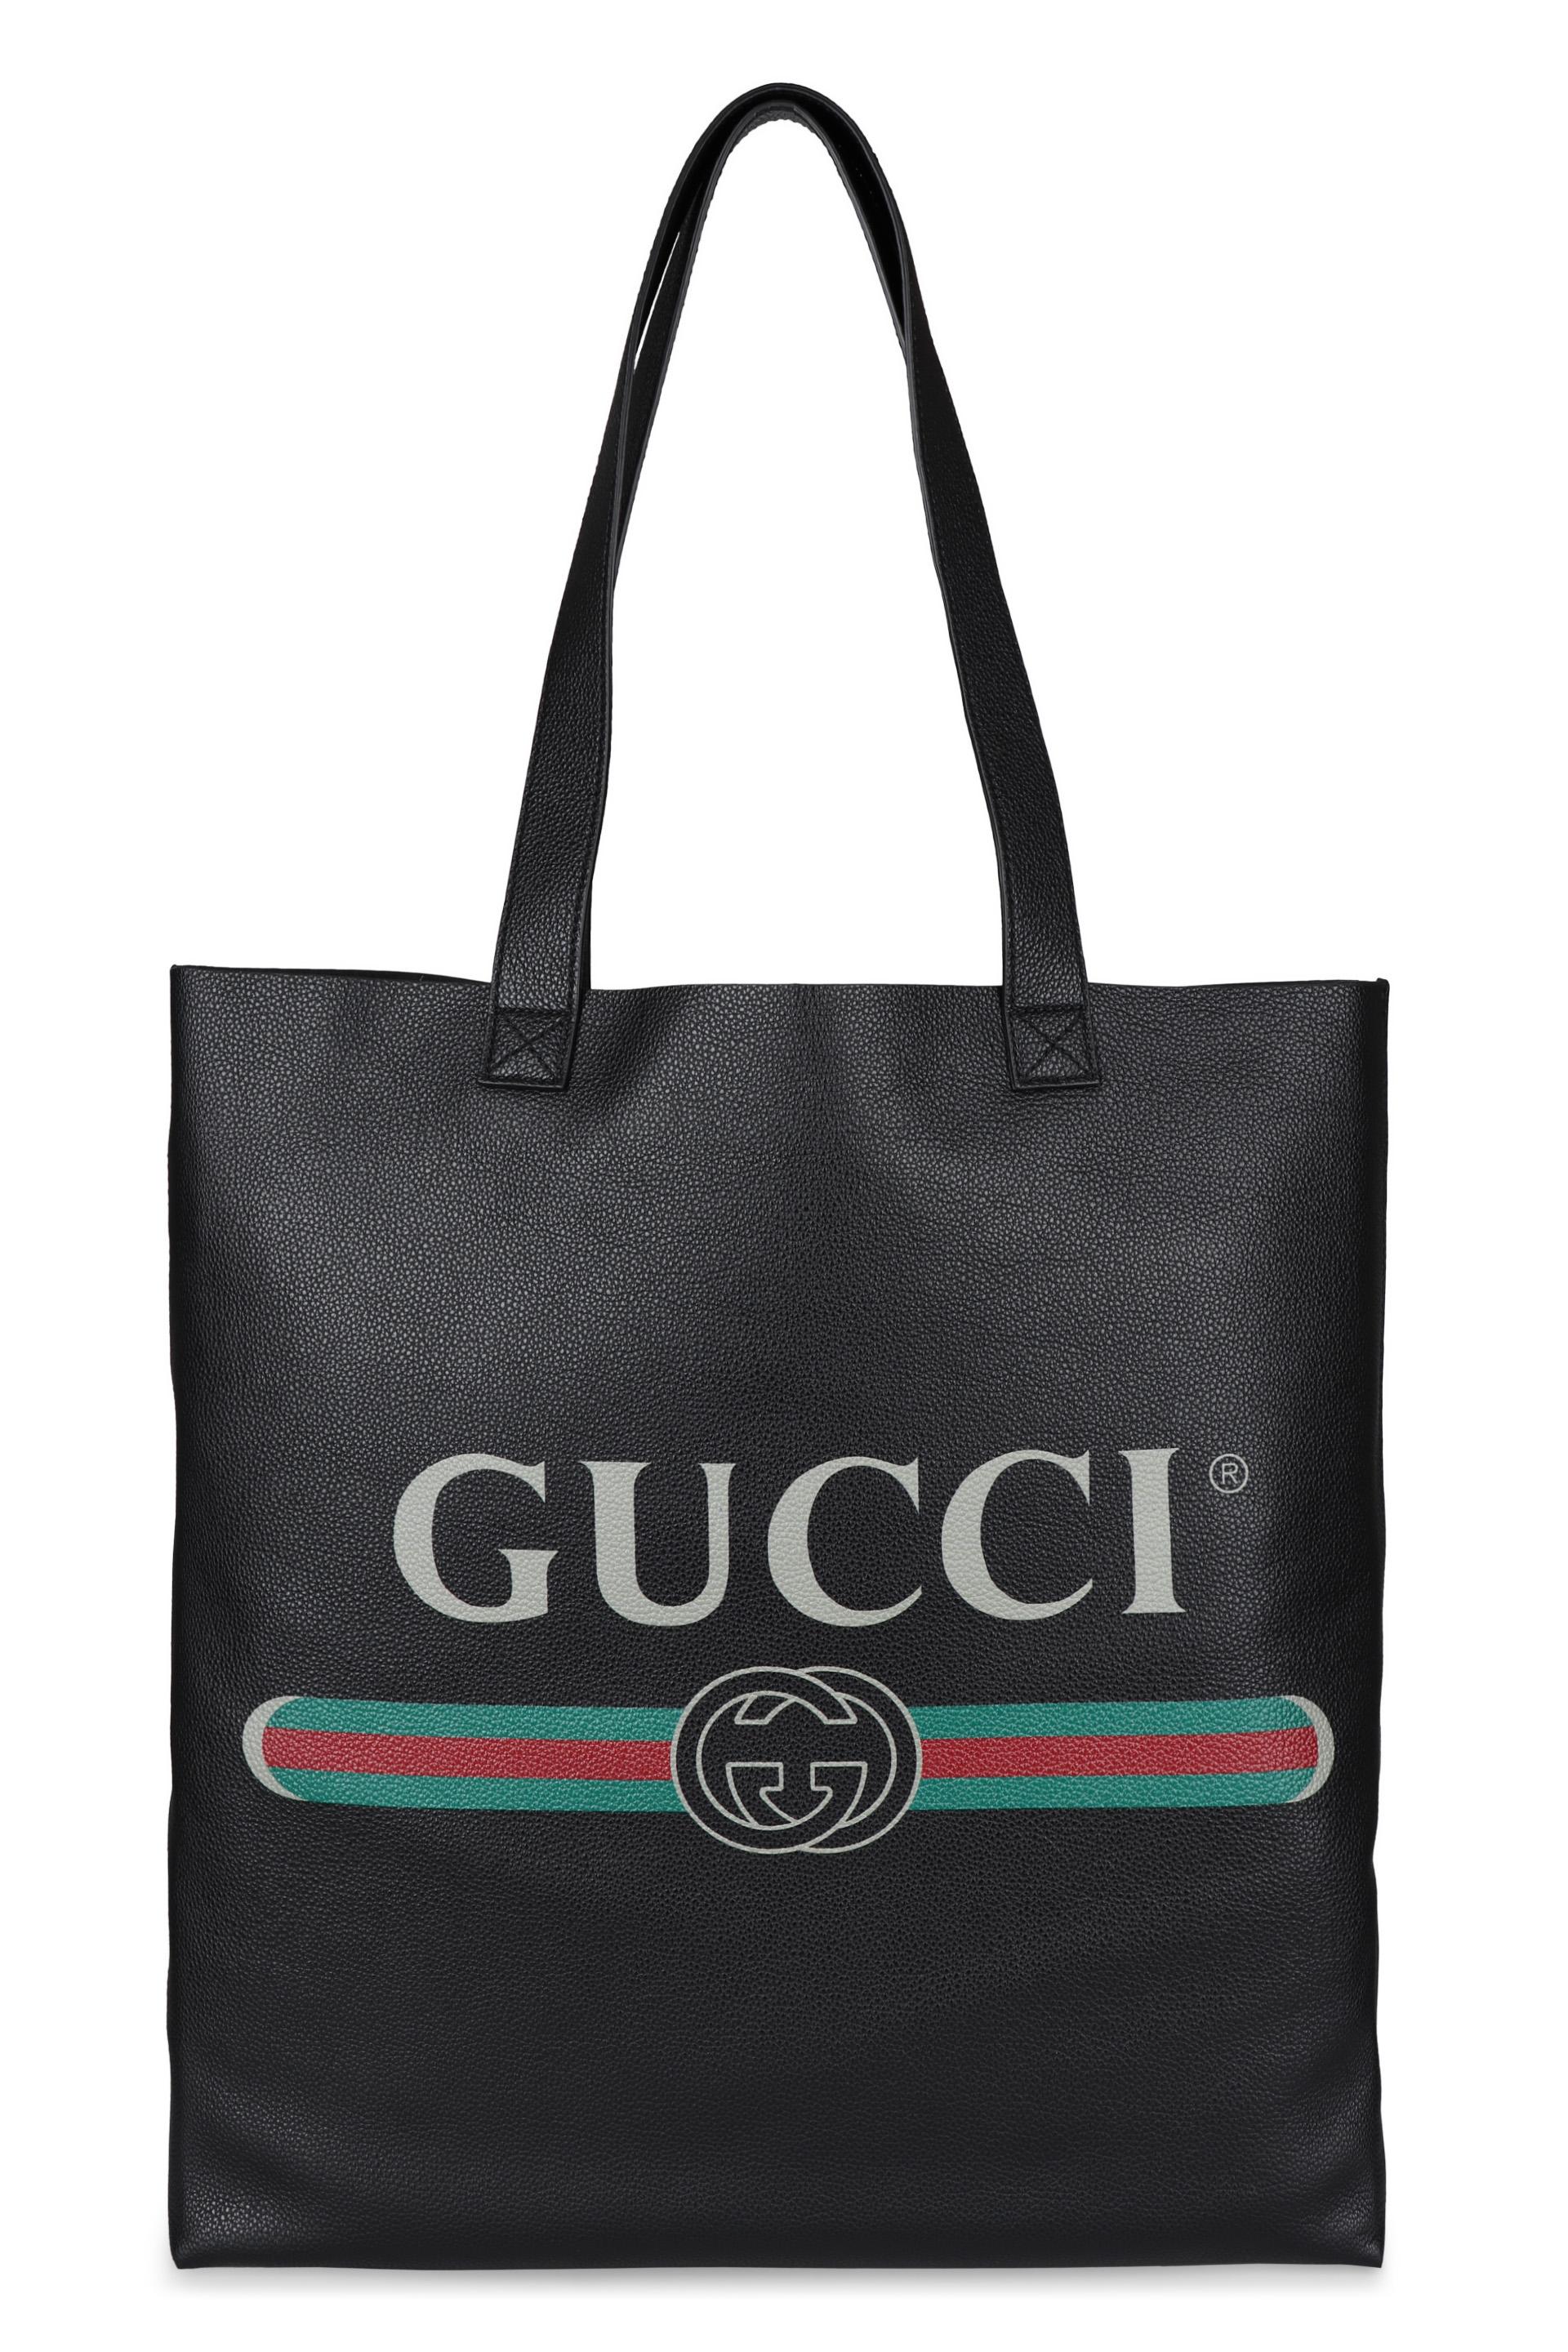 Gucci Leather Tote in Black for Men - Lyst